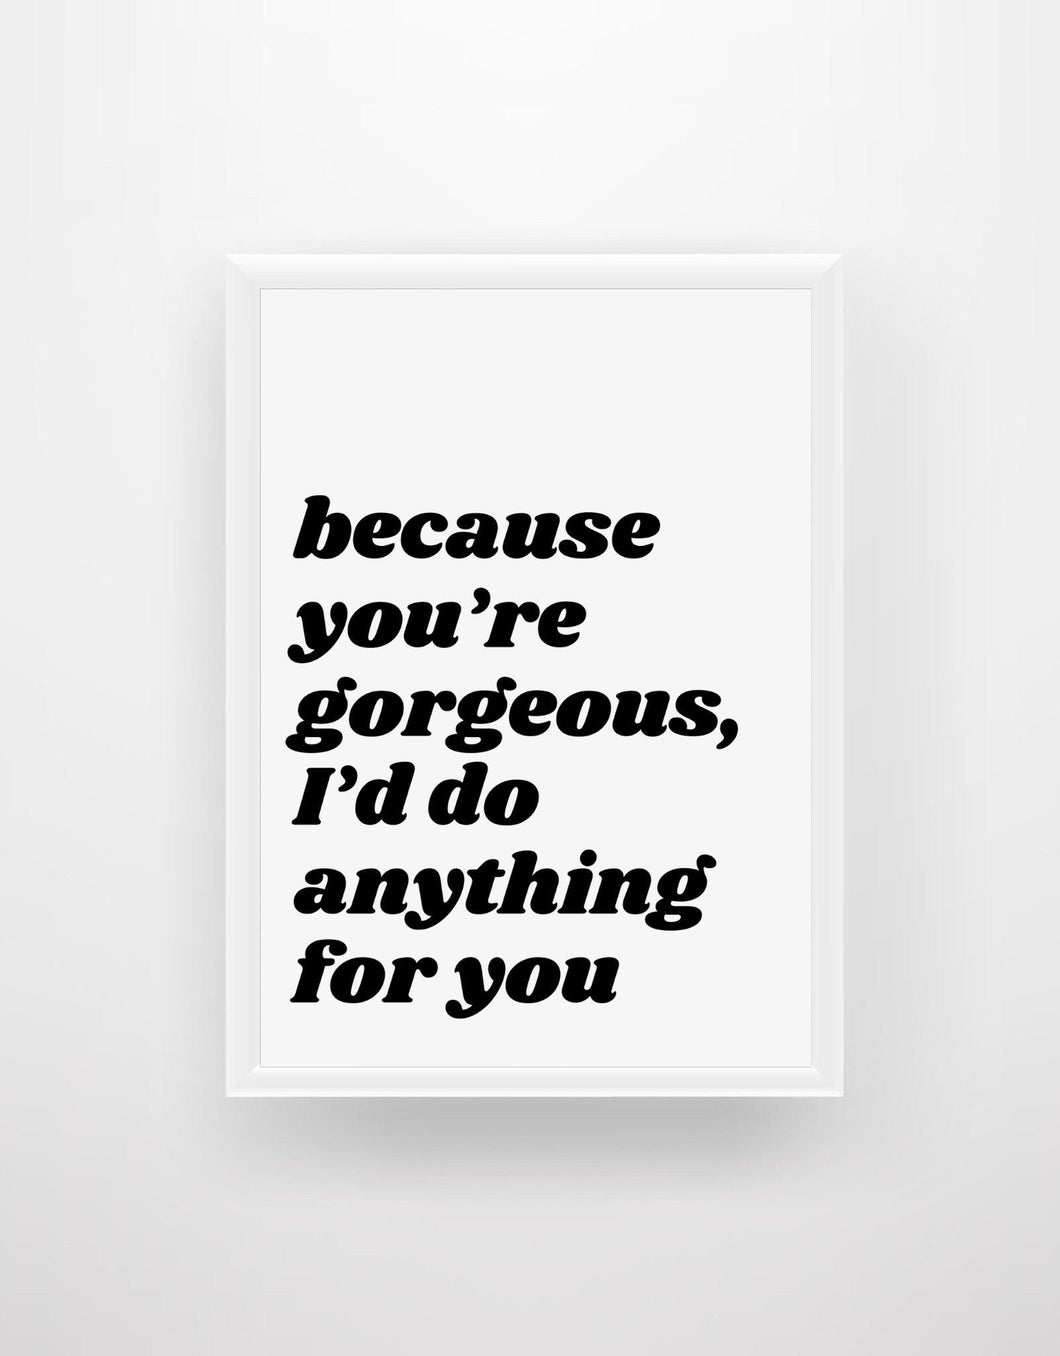 Because you're gorgeous I'd do anything for you - Chic Prints